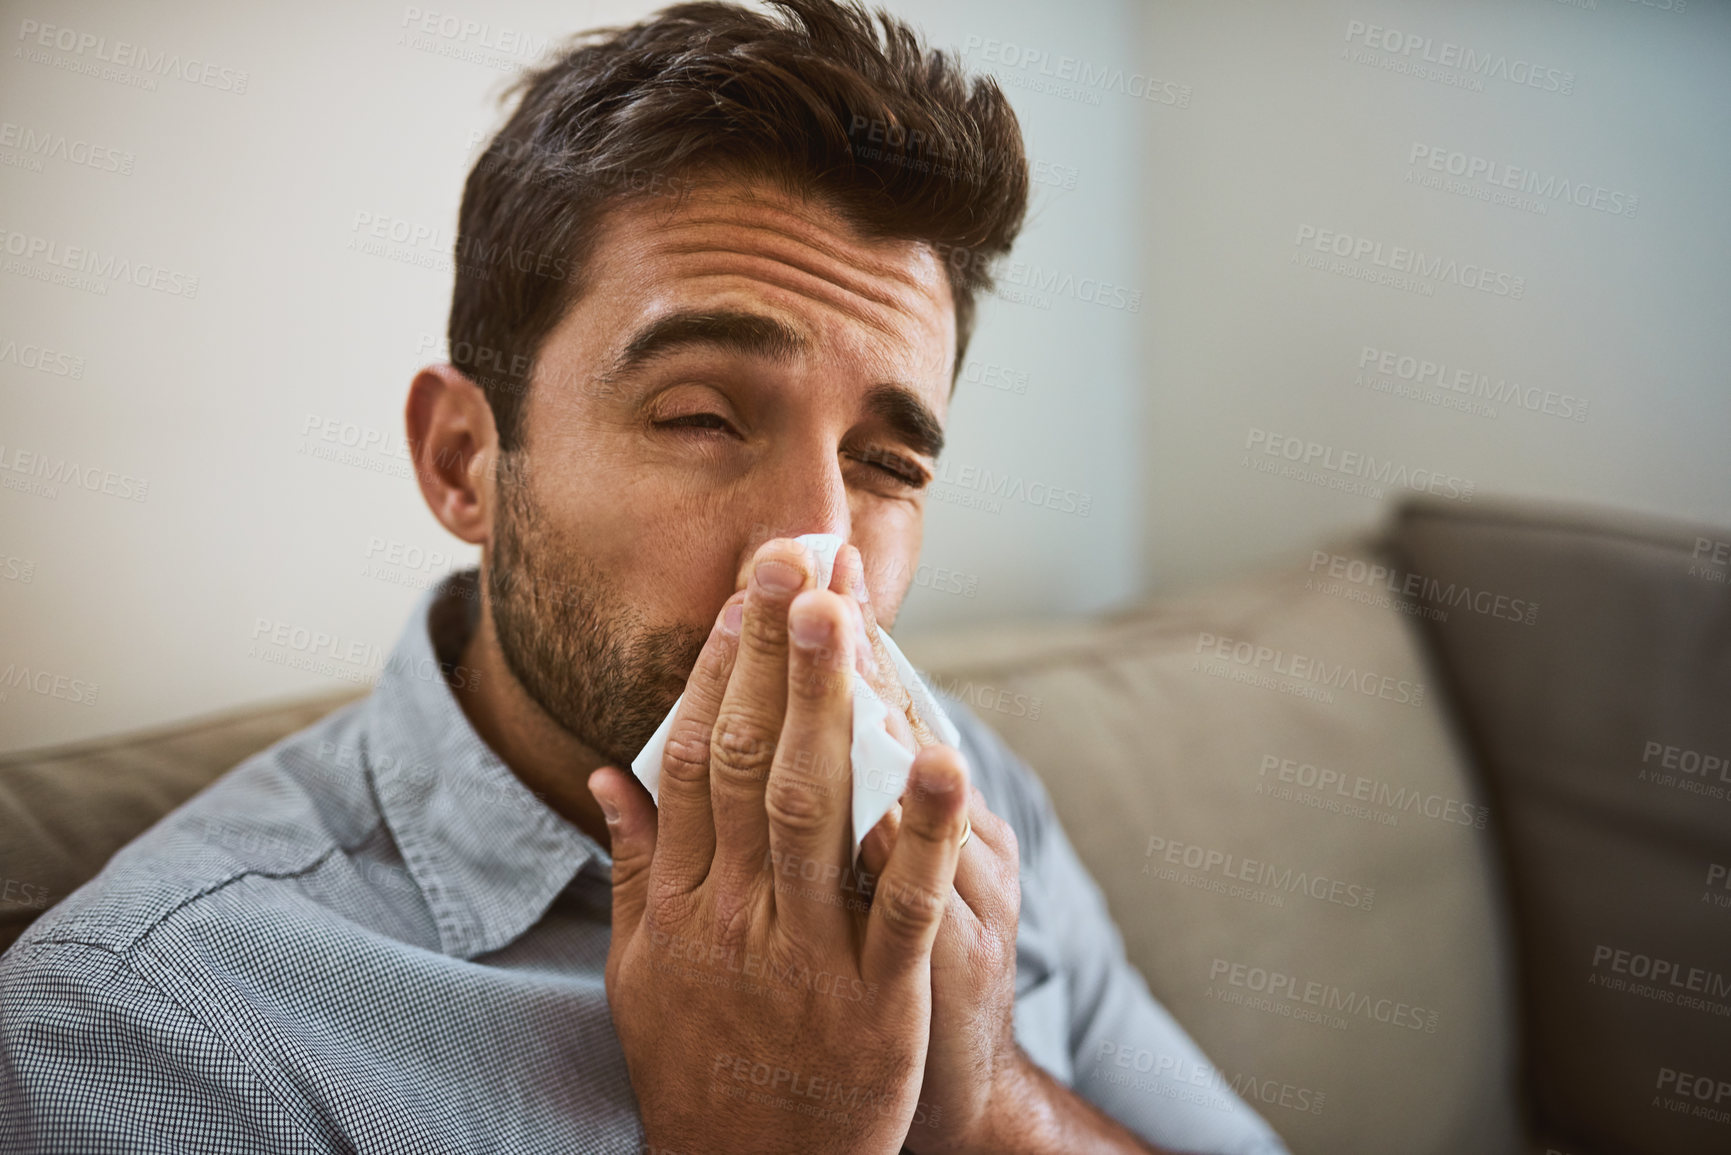 Buy stock photo Portrait of a uncomfortable looking young man sneezing into a tissue while being seated on a couch at home